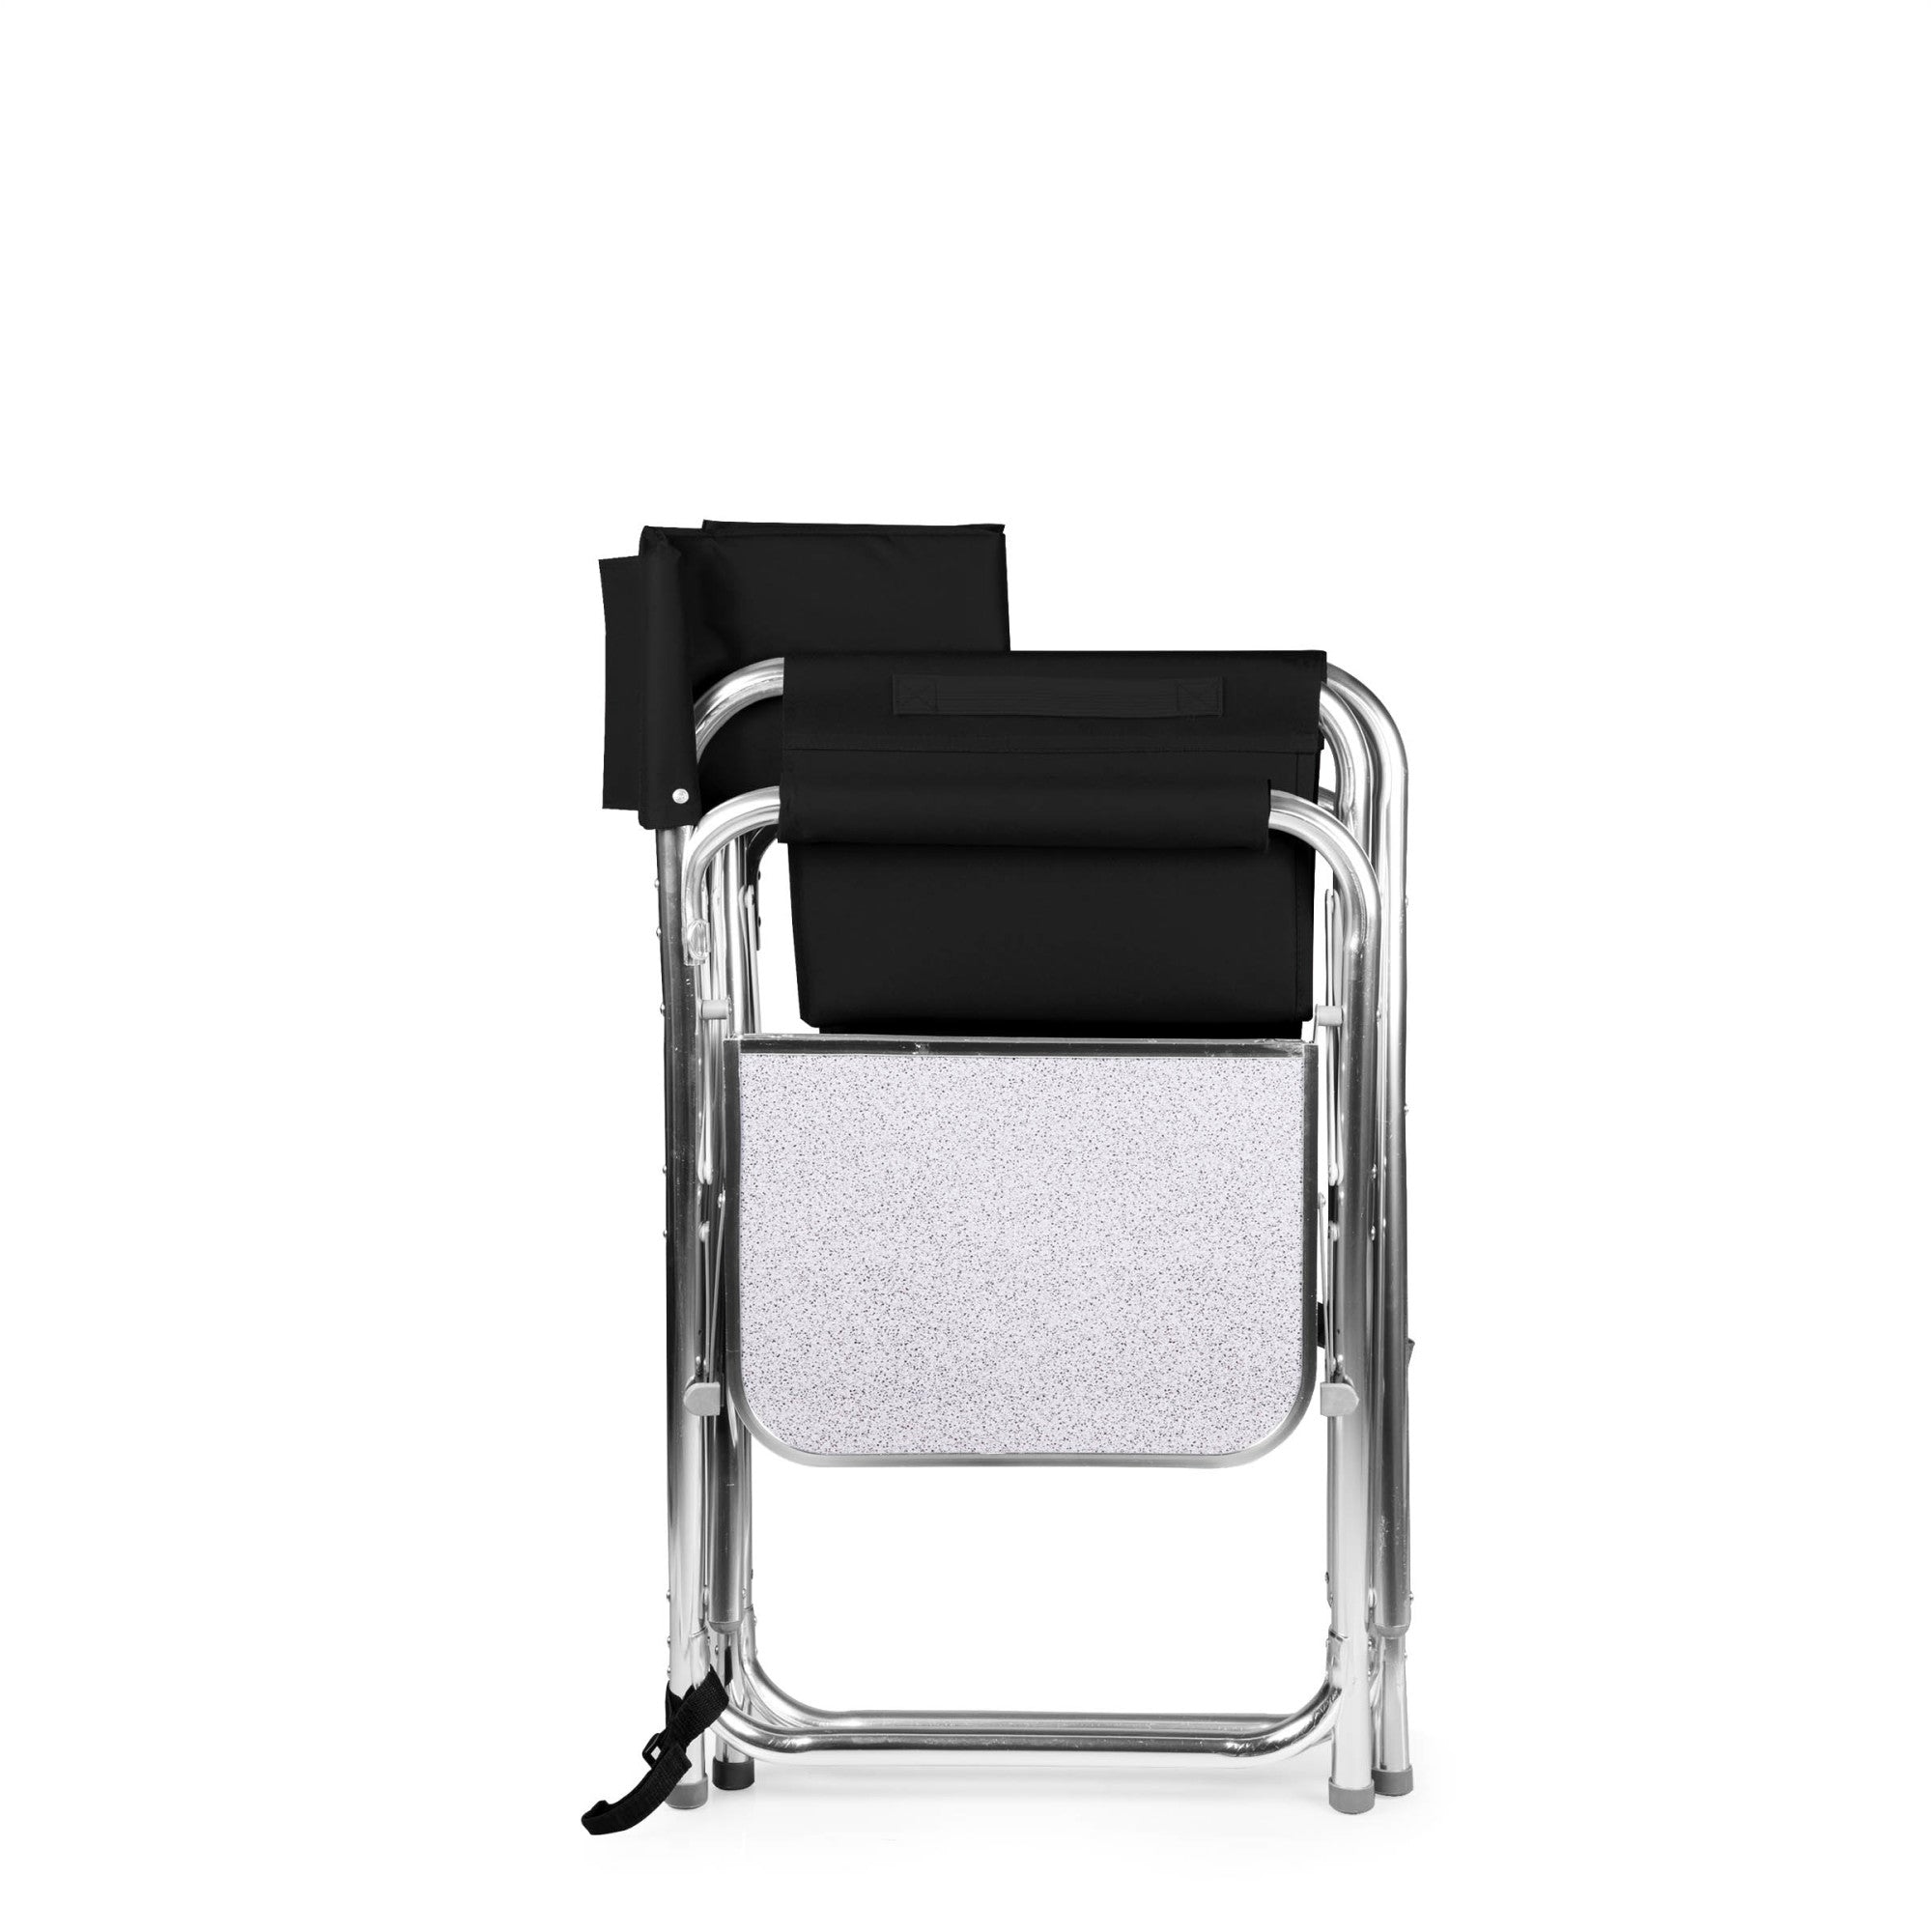 New England Patriots - Sports Chair